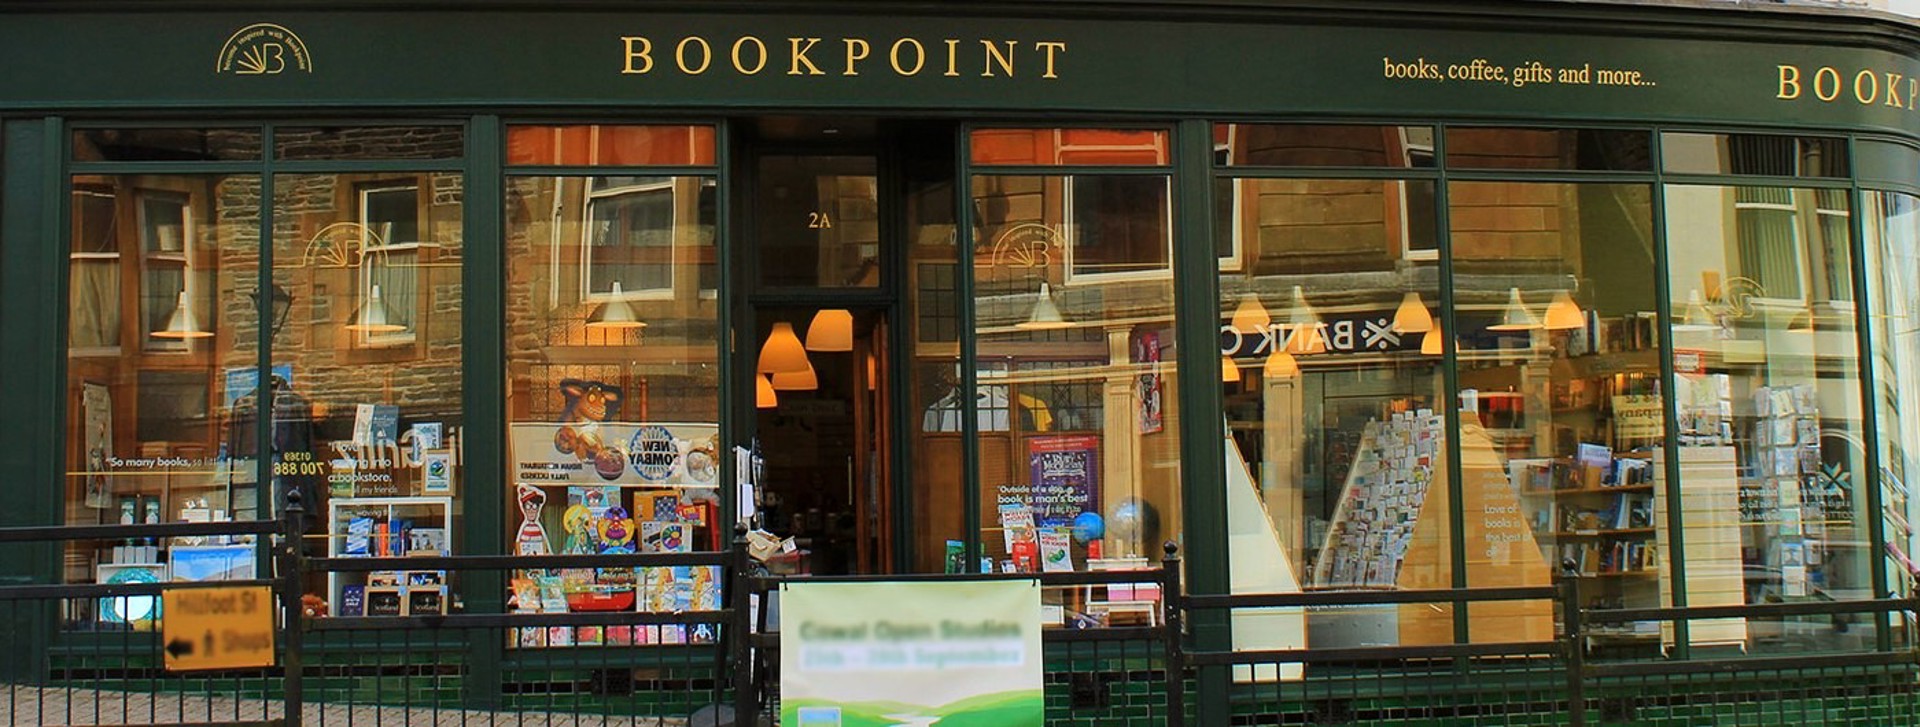 Background image - bookpoint.jpg